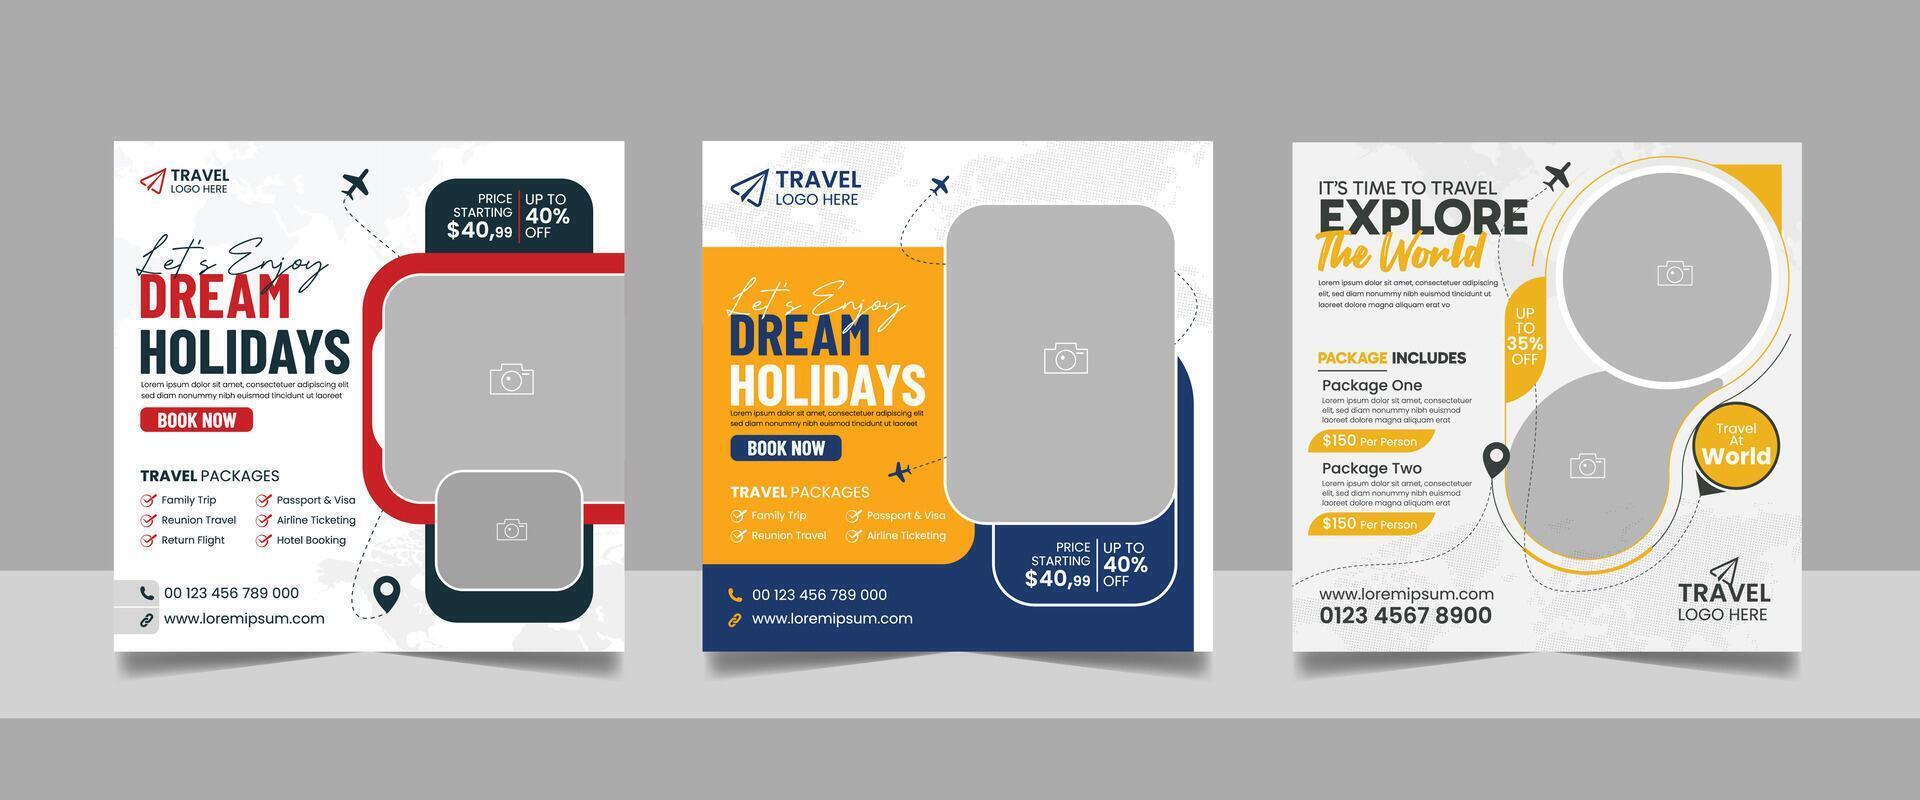 Travel and Tourism Business Marketing Banner. Holidays Tours and Travels Advertising Social Media Posts. Explore the World ads Template Square poster flyer design. vector